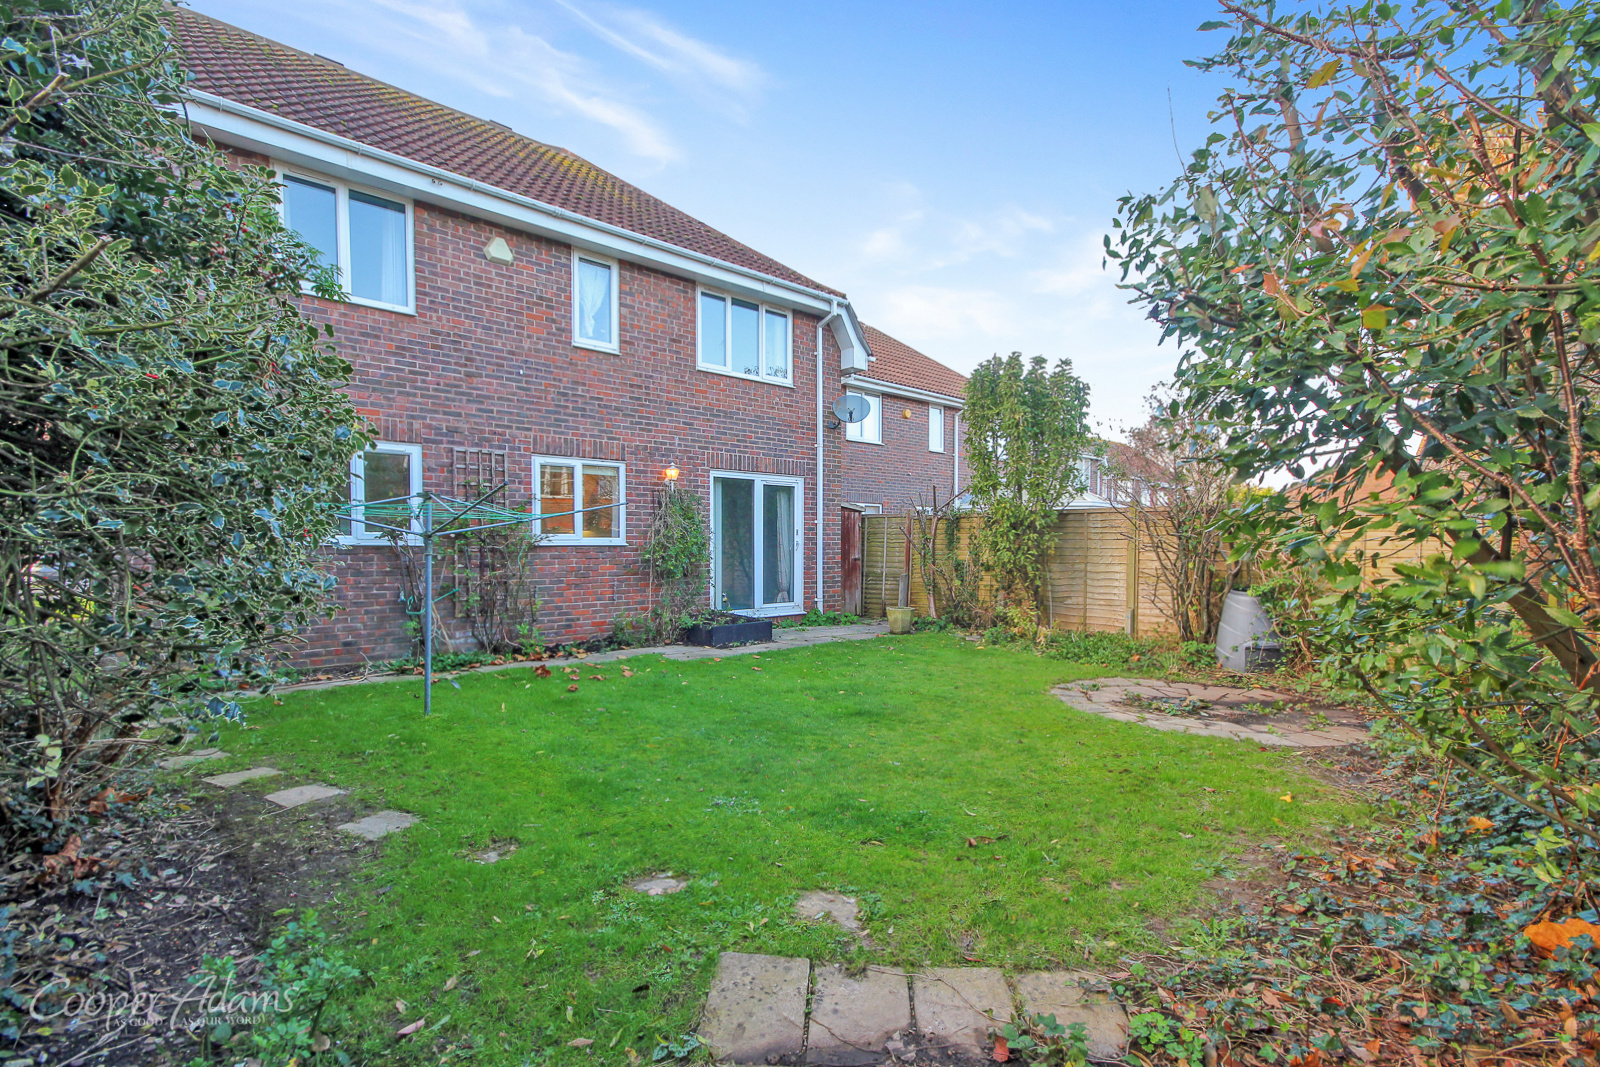 4 bed house for sale in Cowdray Drive, Rustington 1